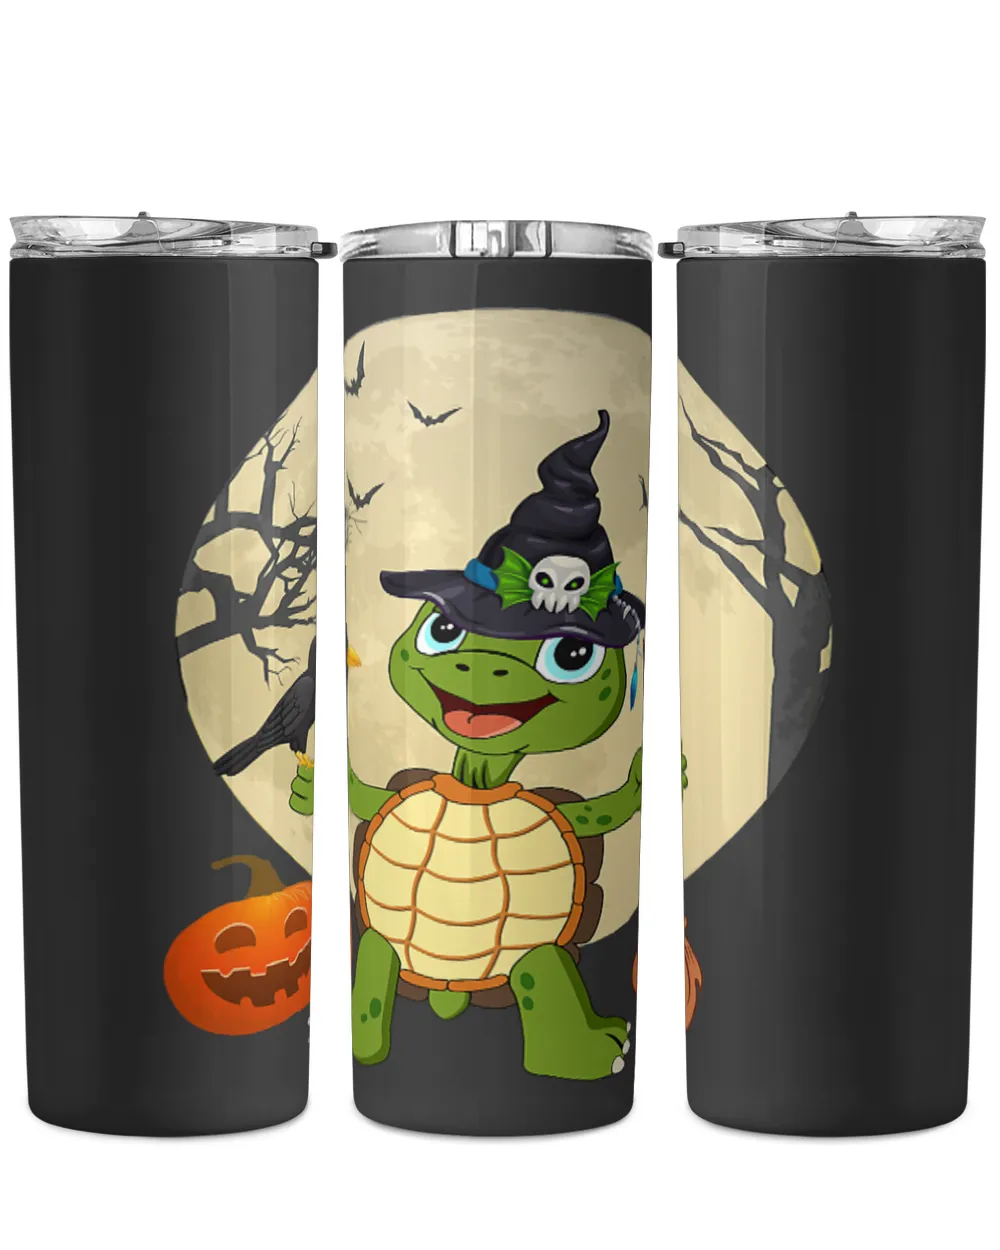 Turtle Lover Halloween Costume Pumpkin Party Witches